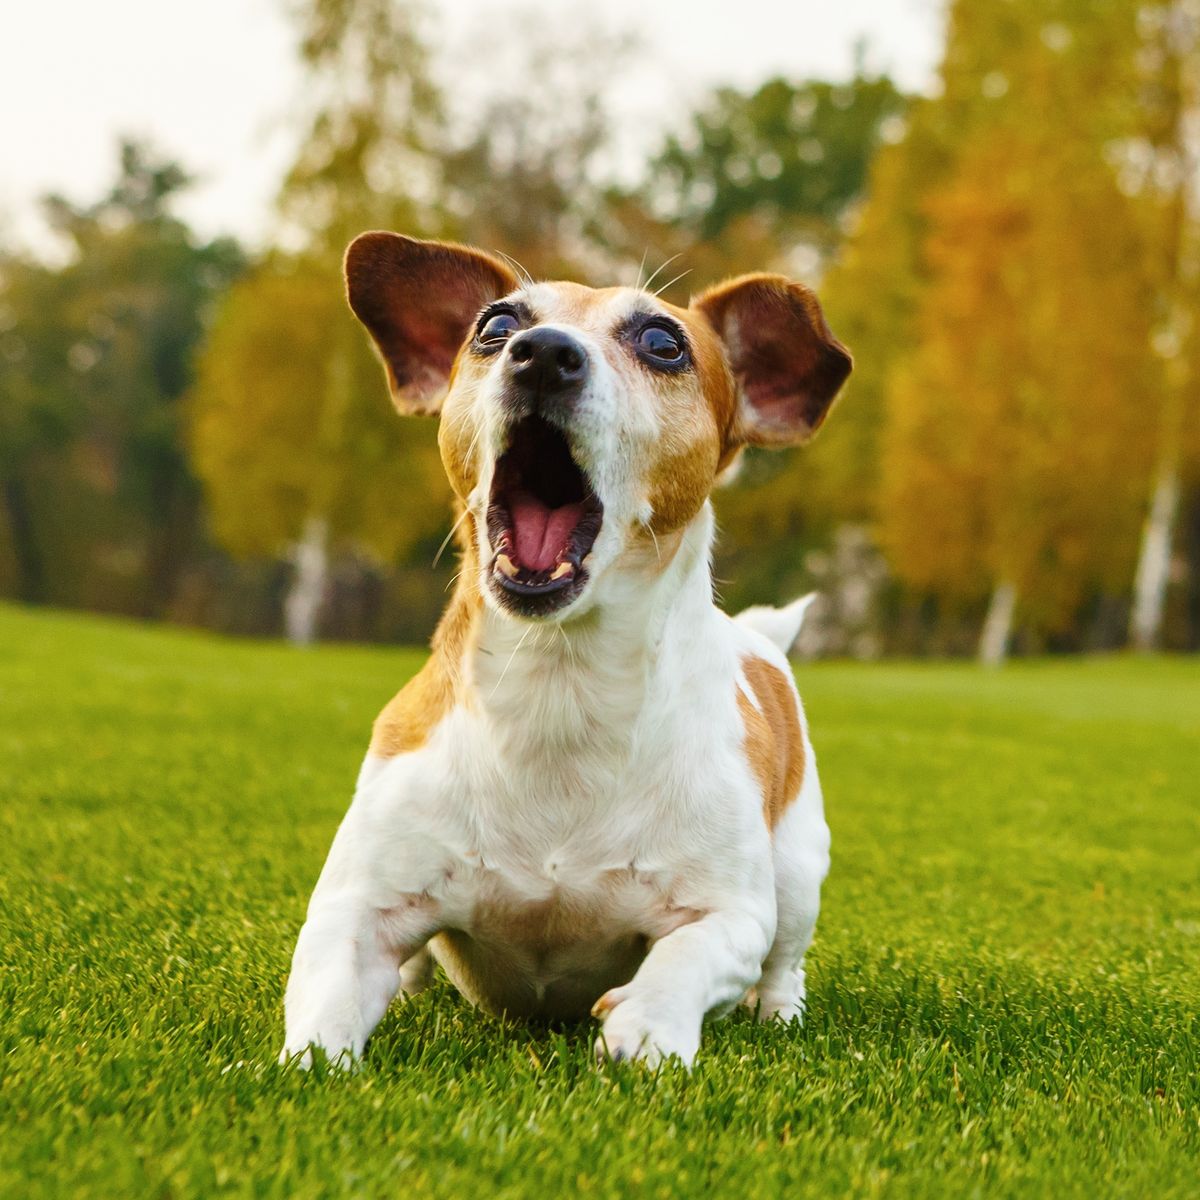 How to Tell If Your Dog is Happy